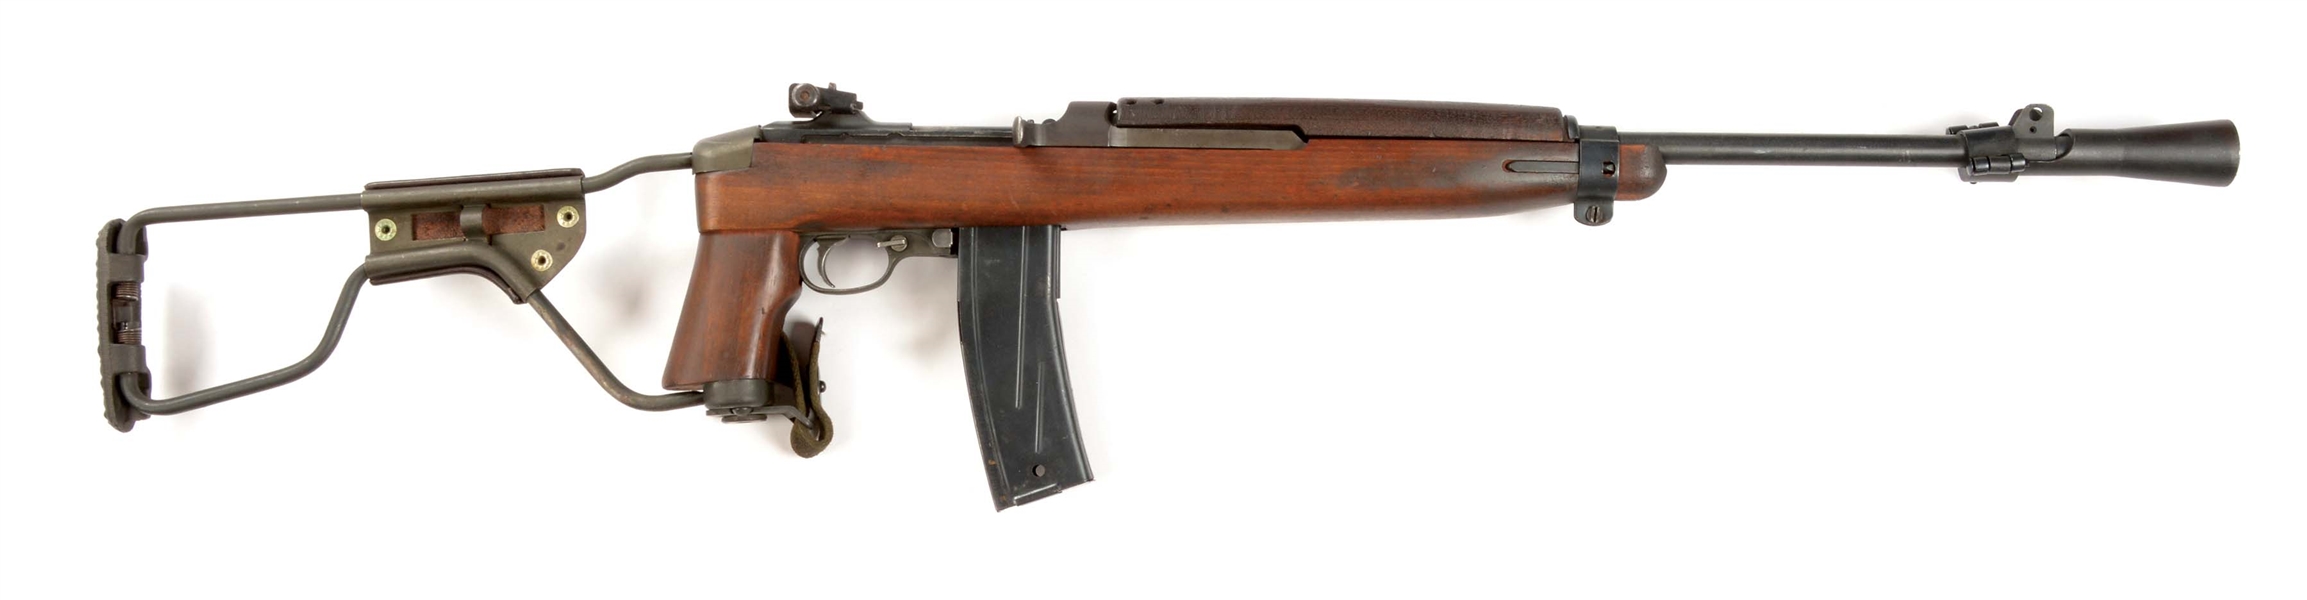 (N) PLAINFIELD M2 CARBINE MACHINE GUN IN ATTRACTIVE REPRODUCTION WW2 FOLDING PARATROOPER STOCK (FULLY TRANSFERABLE).